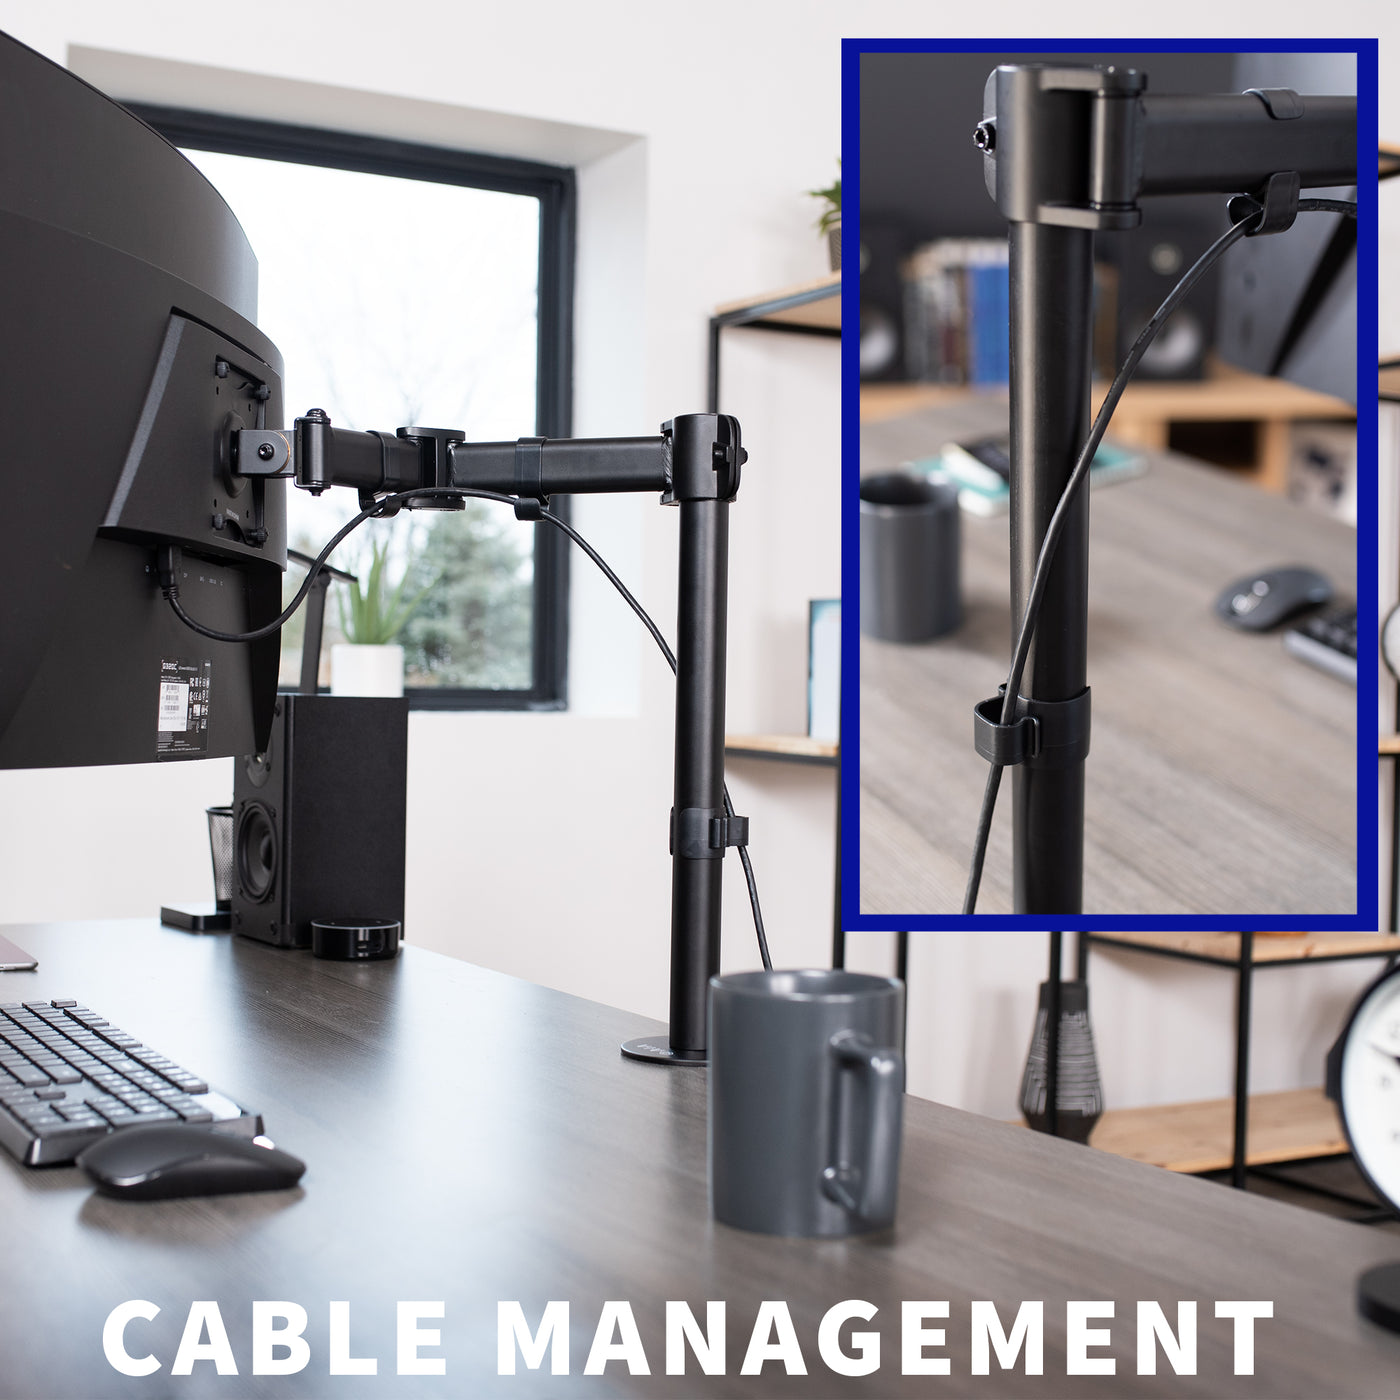 Cable management is provided along the main frame to keep an organized workspace.